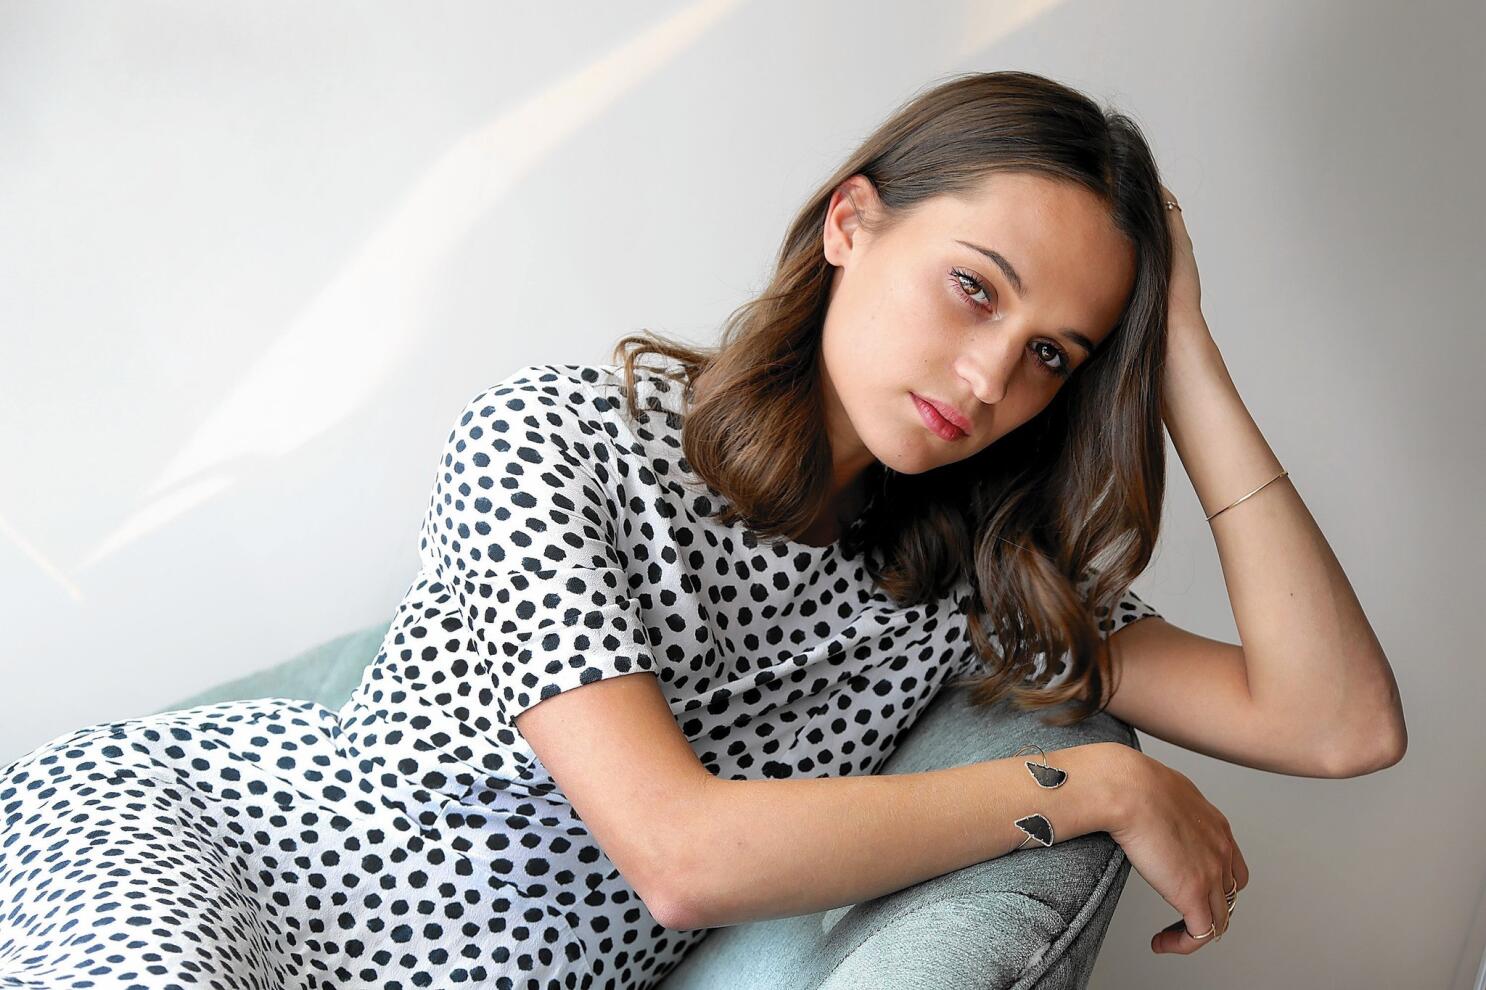 Alicia Vikander signs up for 'The Marsh King's Daughter' - INDIE